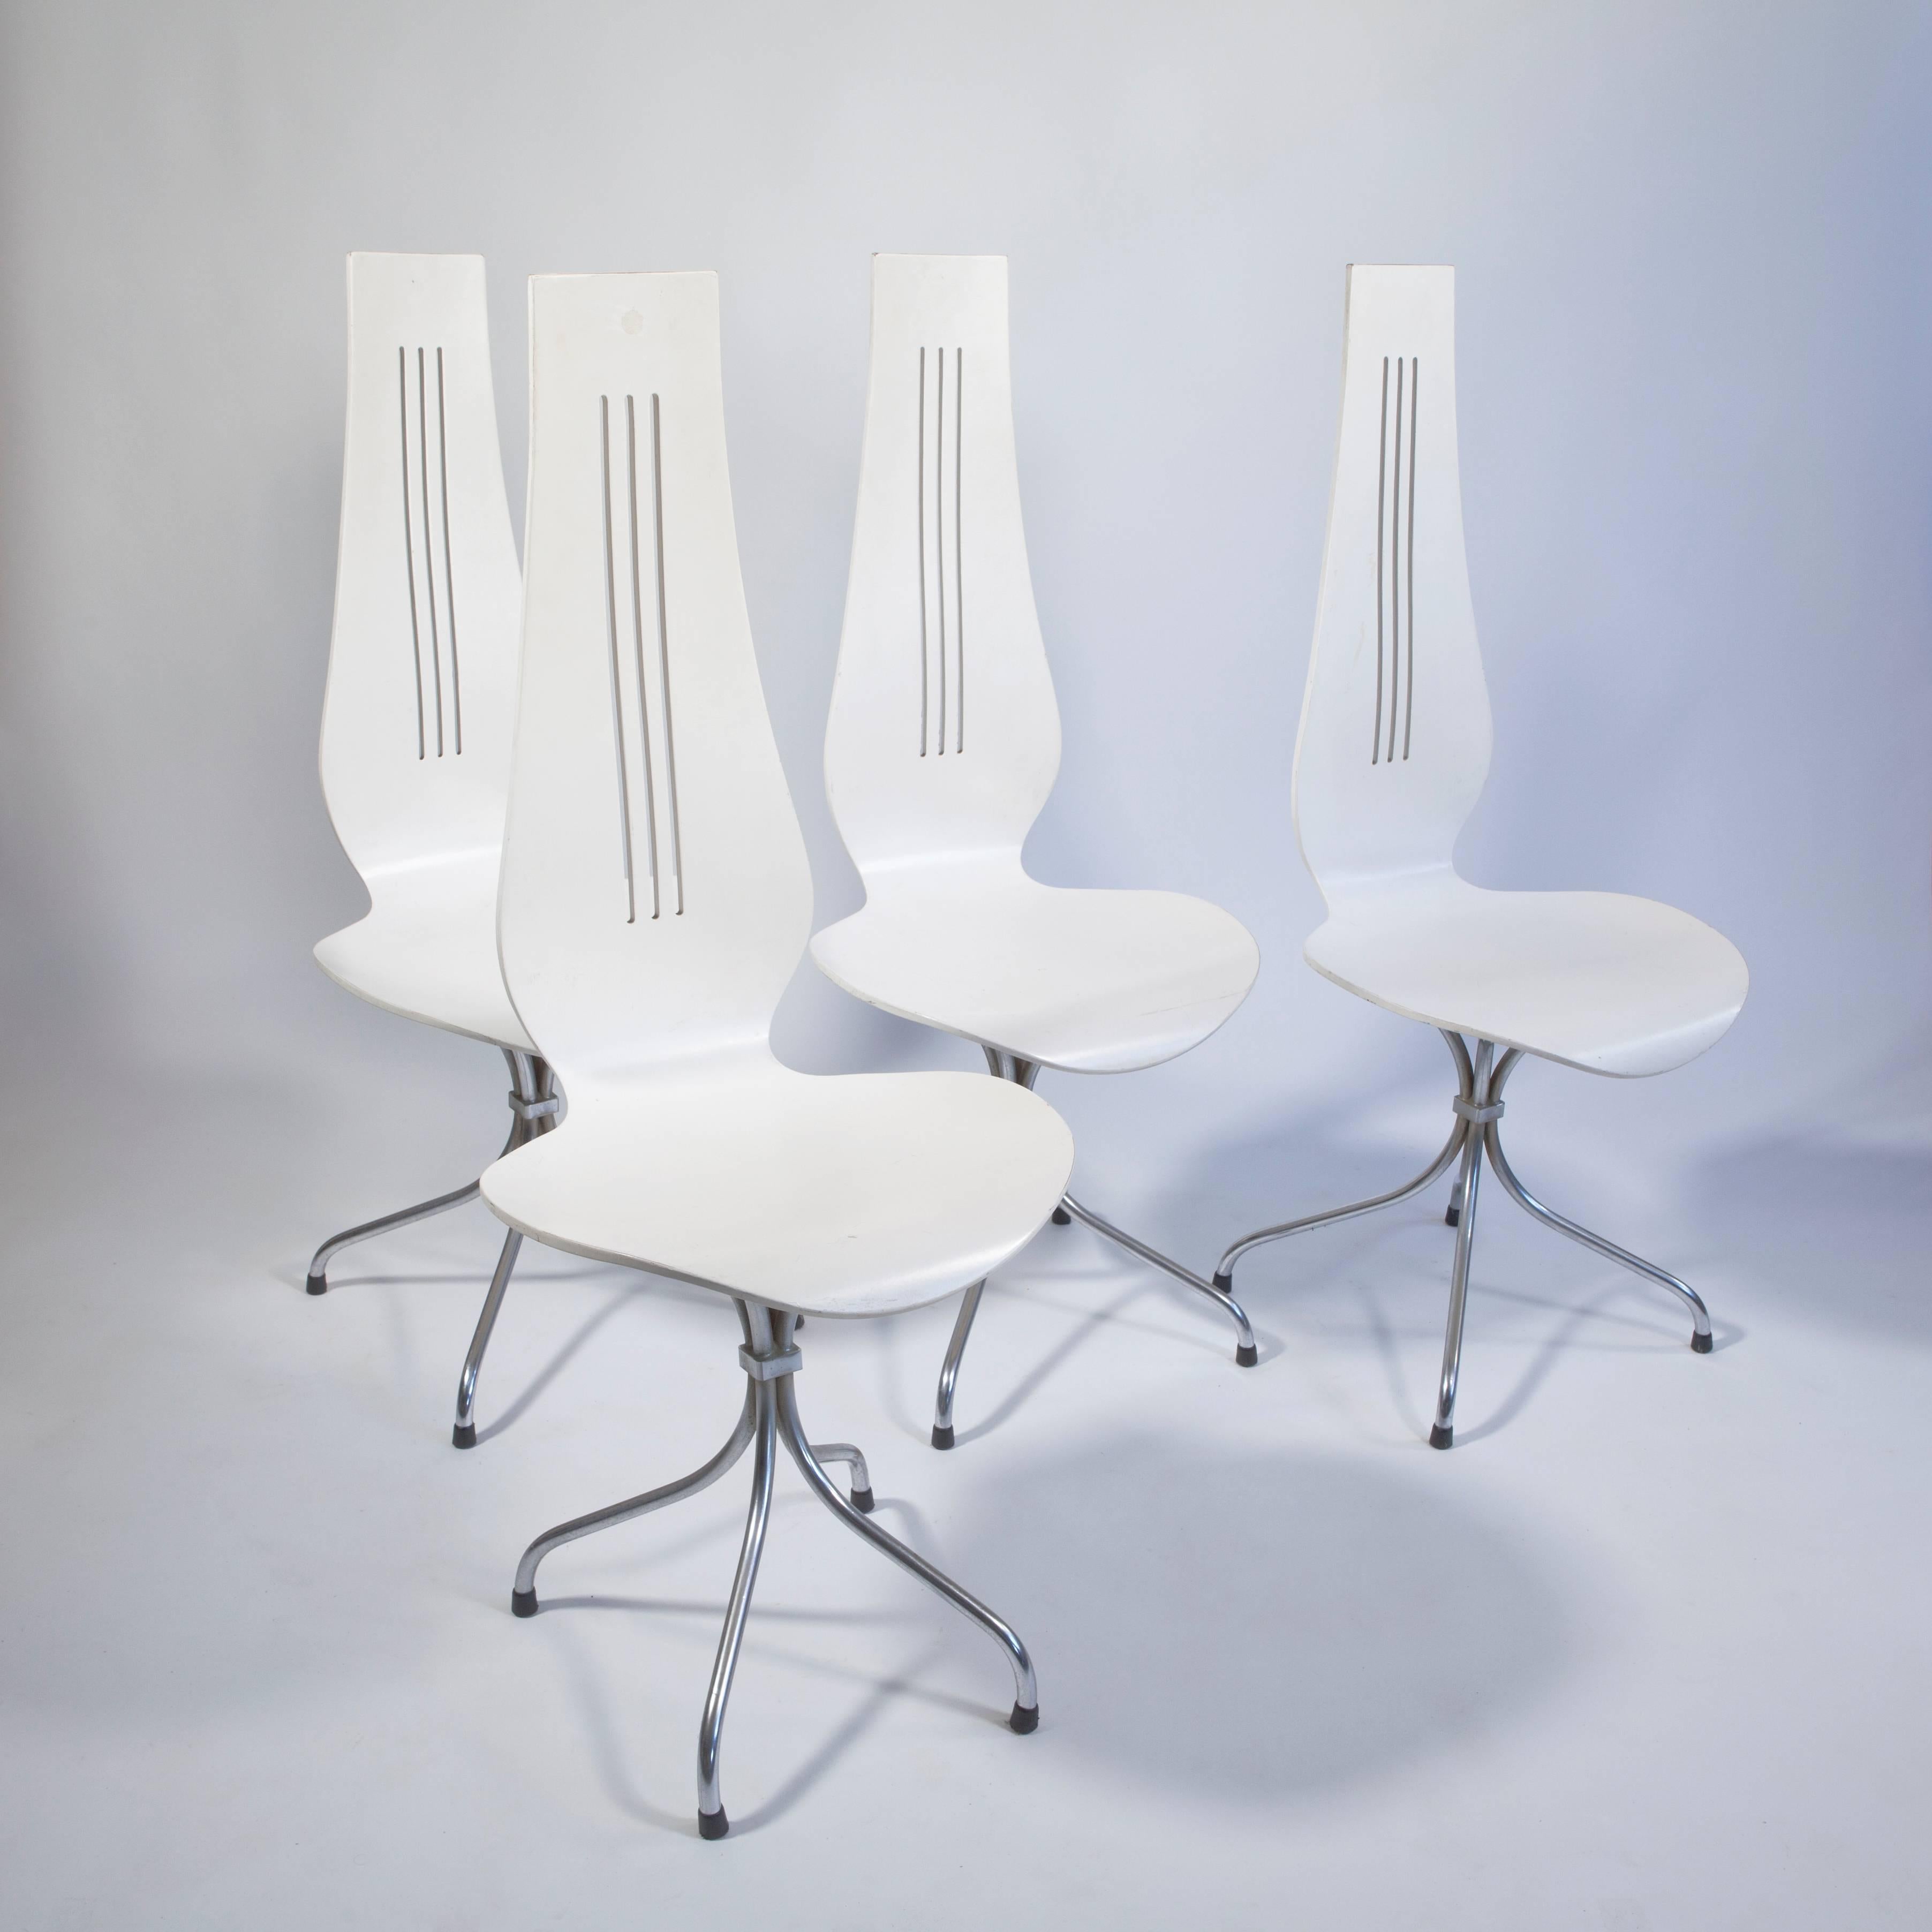 Mid-20th Century Vintage Design Chairs 'Lyre' by Theo Häberli, 1960 For Sale